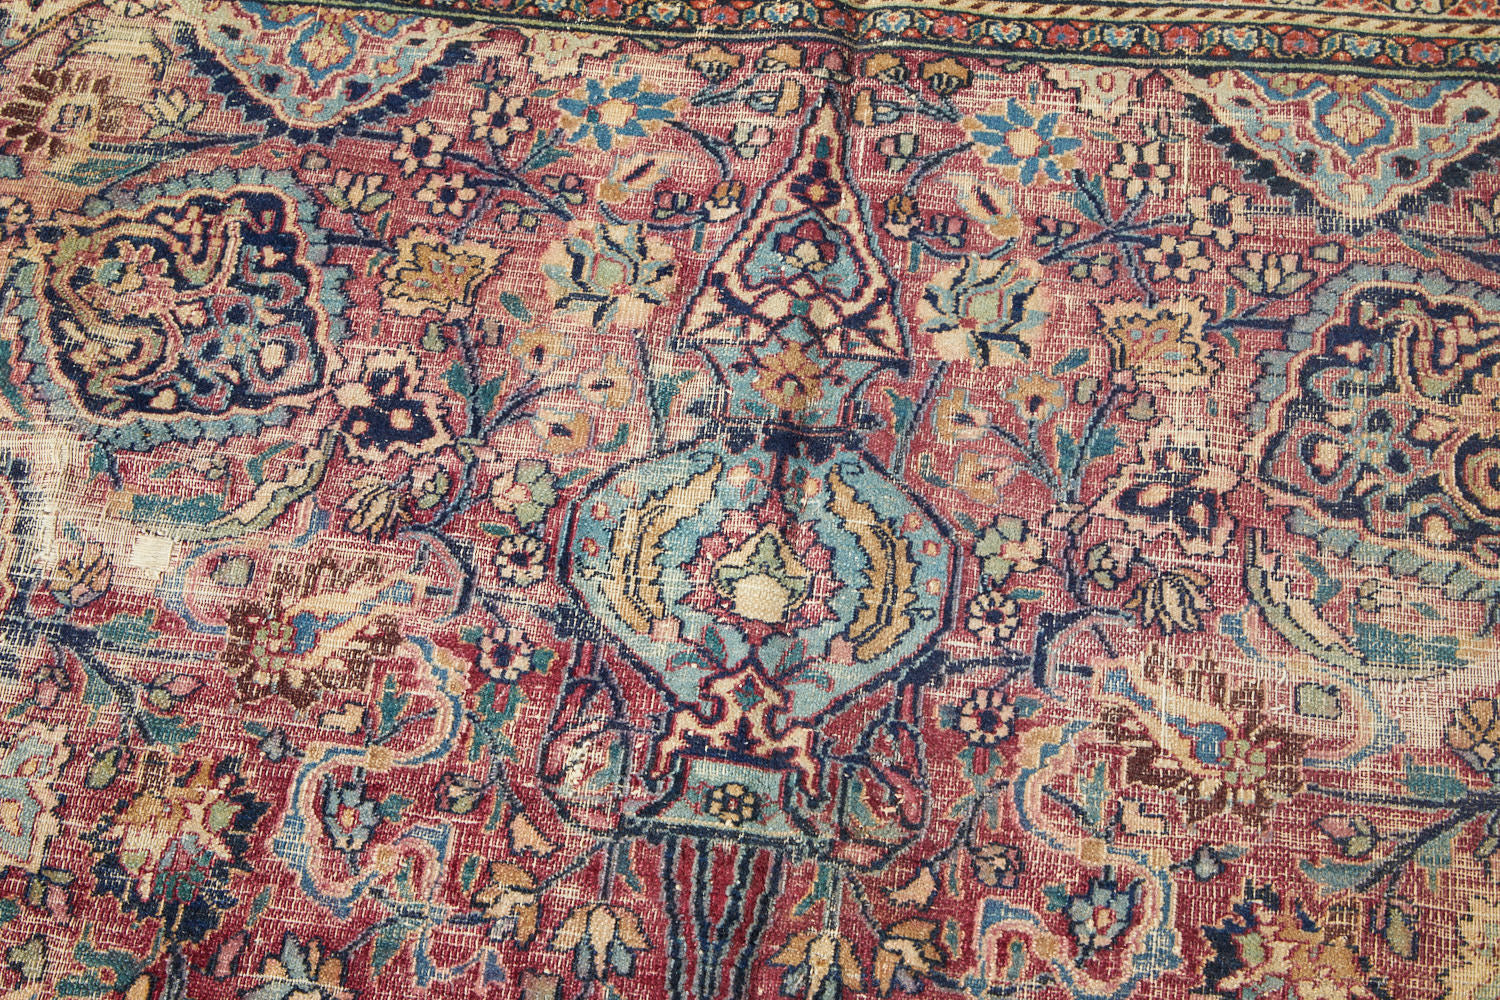 Hand woven antique room-sized Meshed Persian Rug with burgundy purple red base and blue, cream and gold intricately woven patterns of flowers and vines with large medallion in center - Available from King Kennedy Rugs Los Angeles